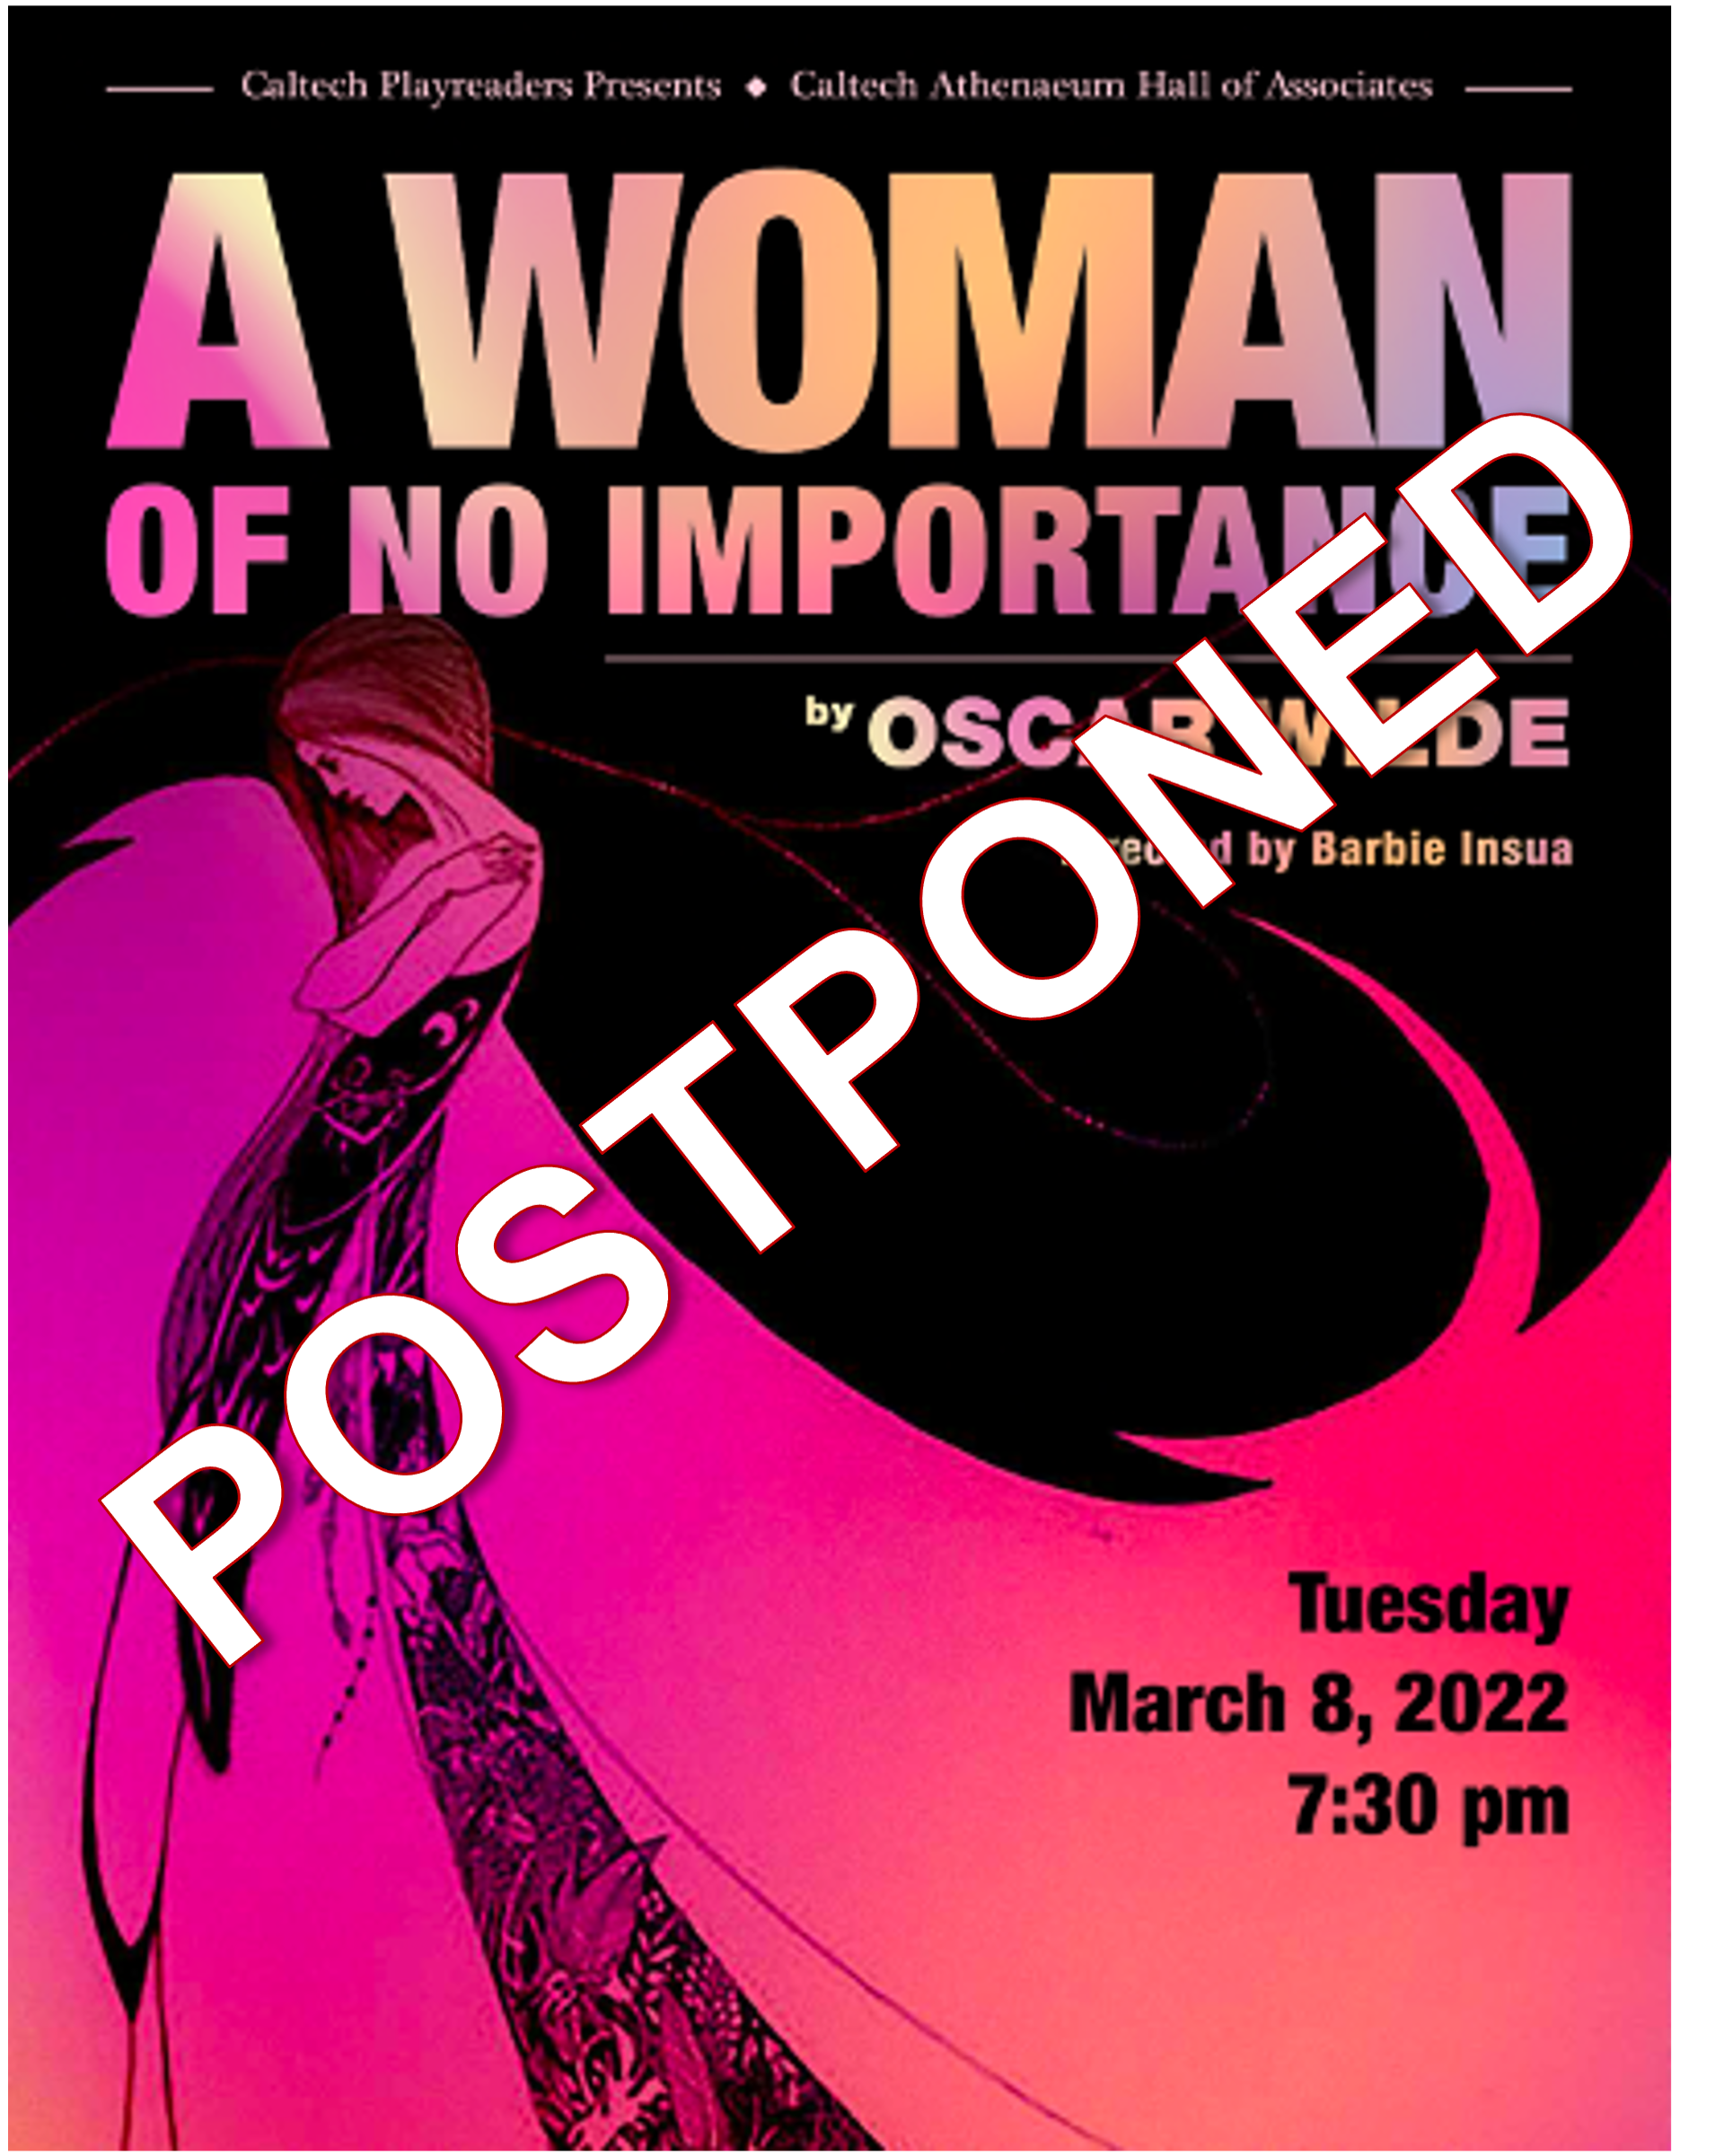 Poster for the Oscar Wilde show A Woman of No Importance